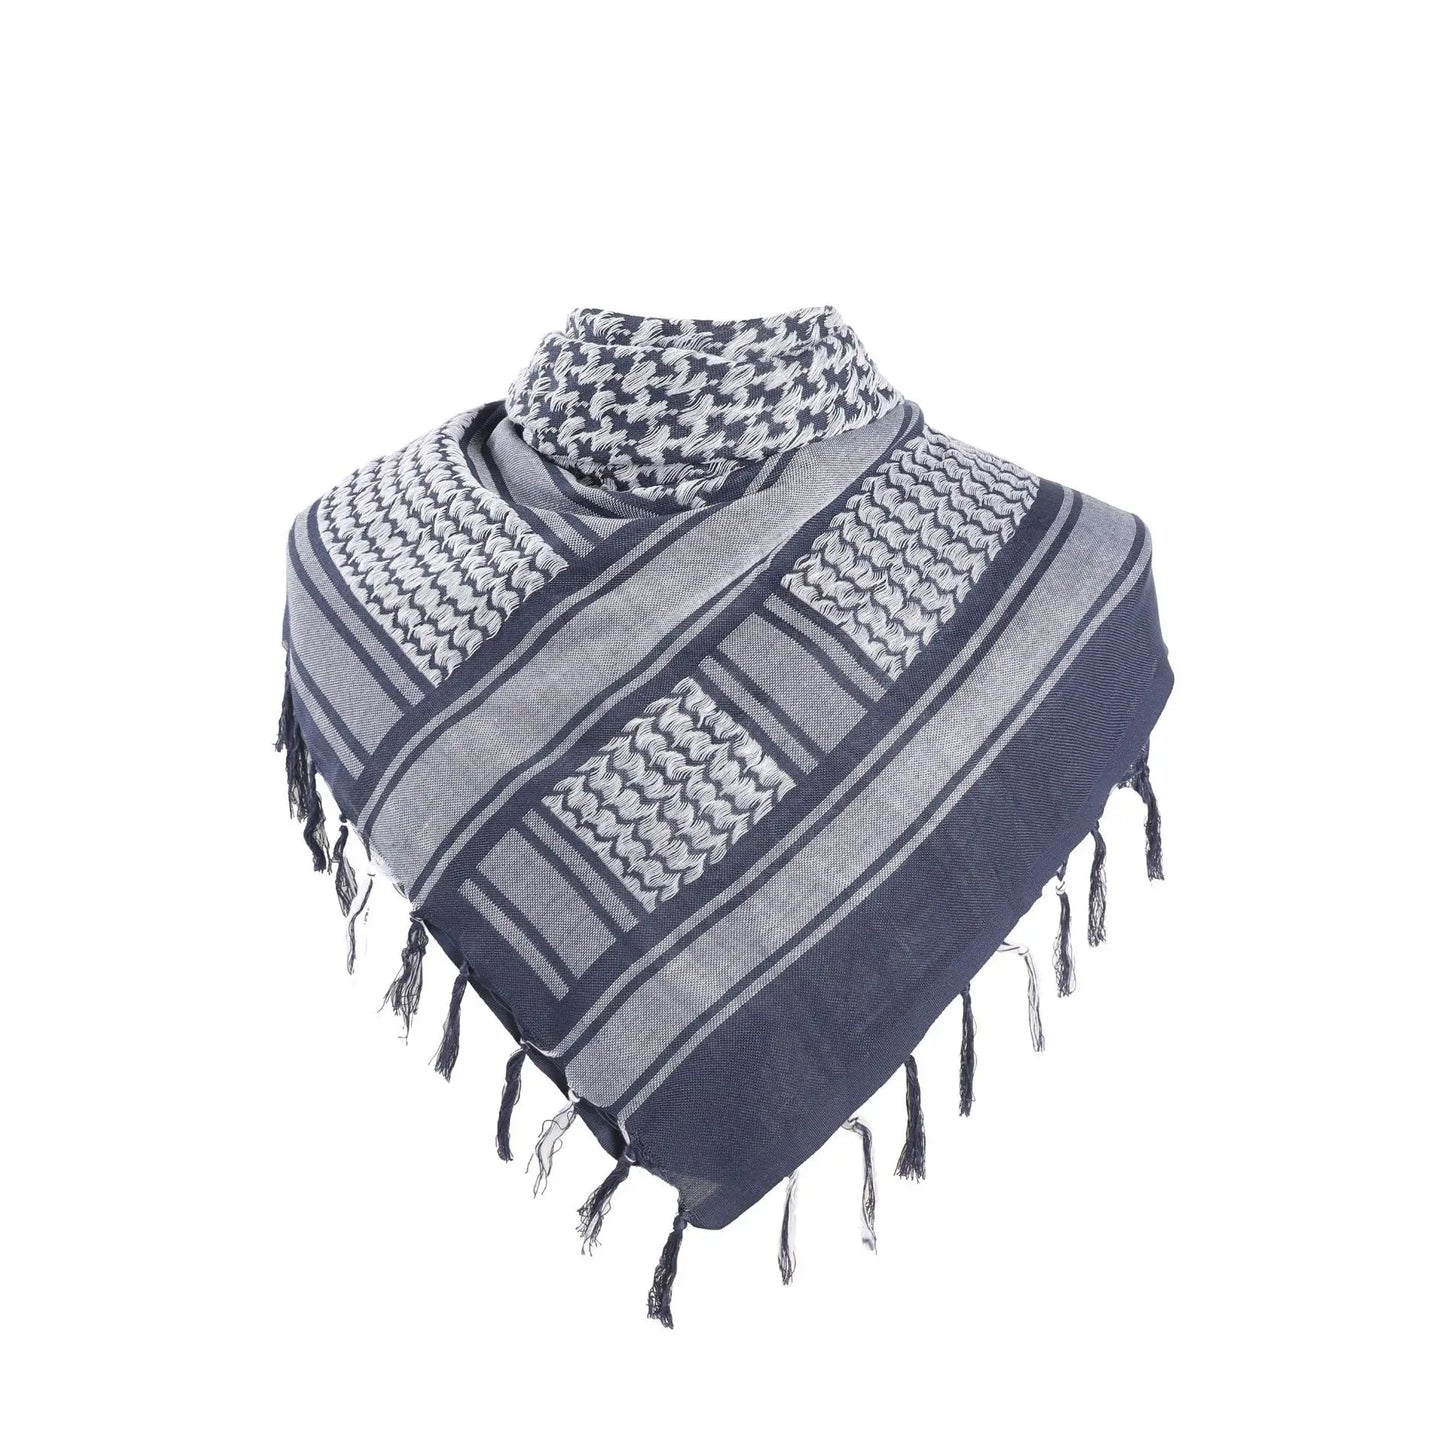 Military Arab Keffiyeh Shemagh Scarf Cotton Winter Shawl Neck Warmer Cover Head Wrap Windproof Tactical Camping Scarf Men Women